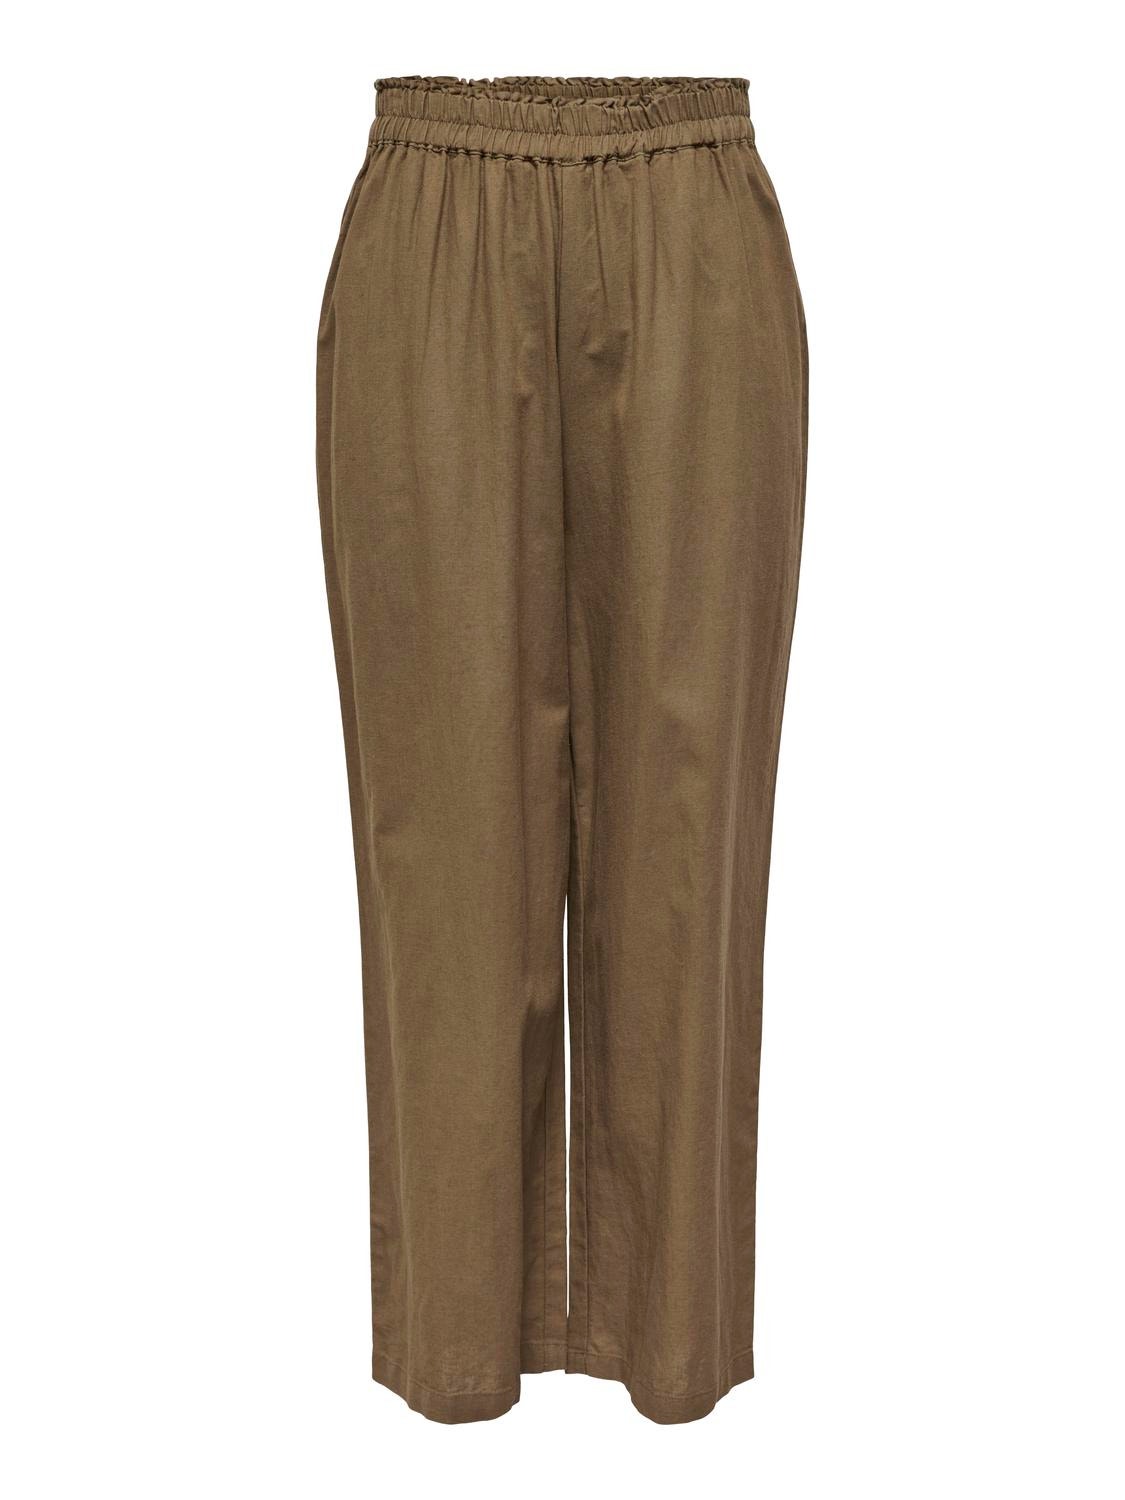 ONLY High waisted linen blend Trousers -Cub - 15259590